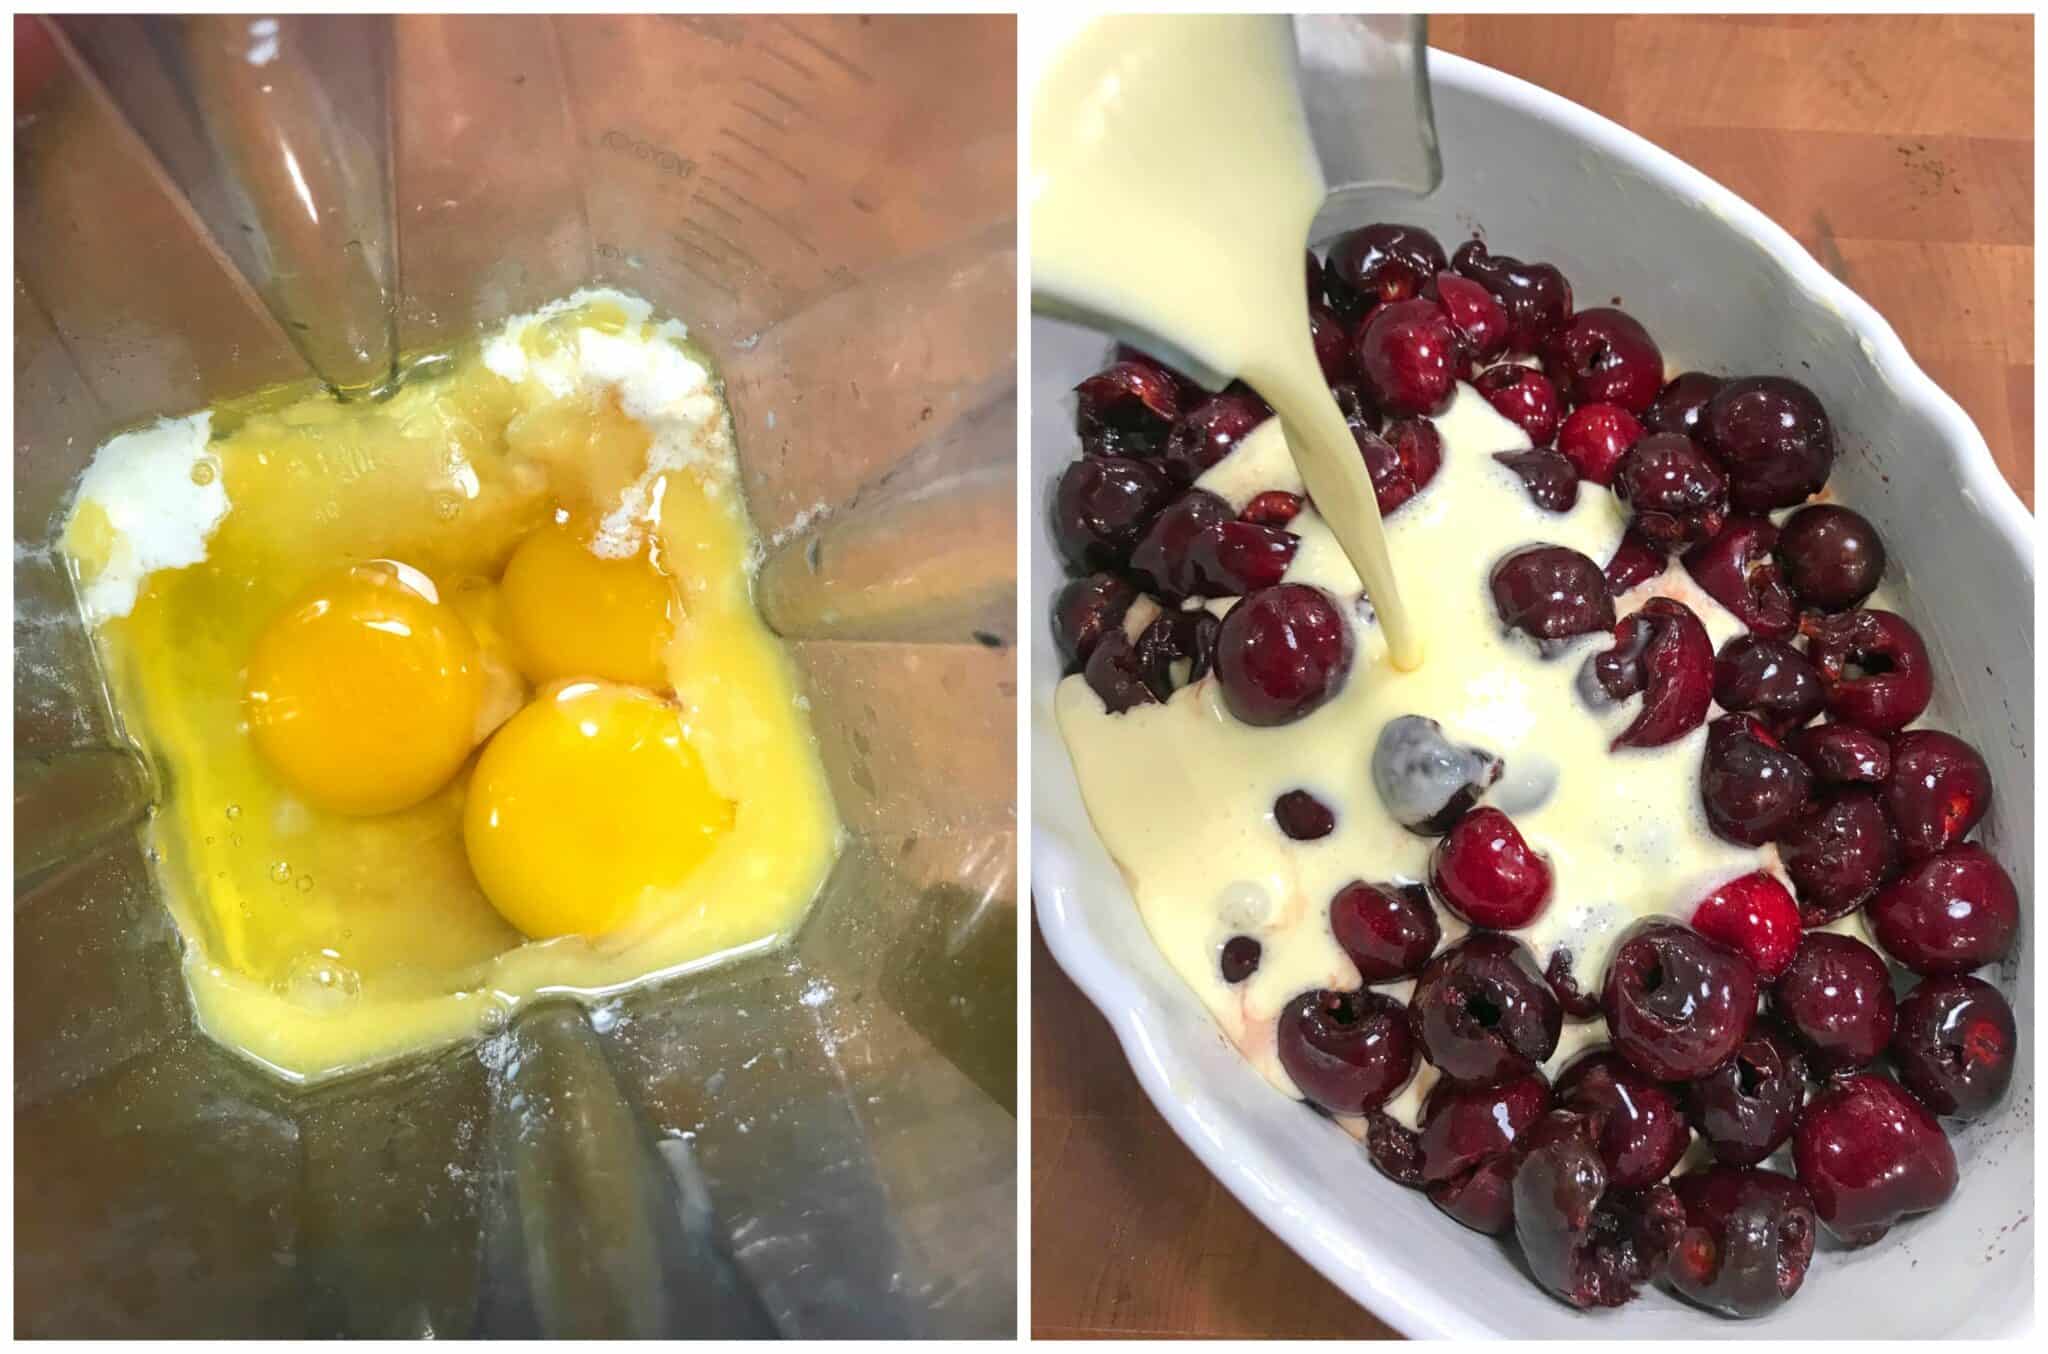 making batter and pouring into baking dish with cherries